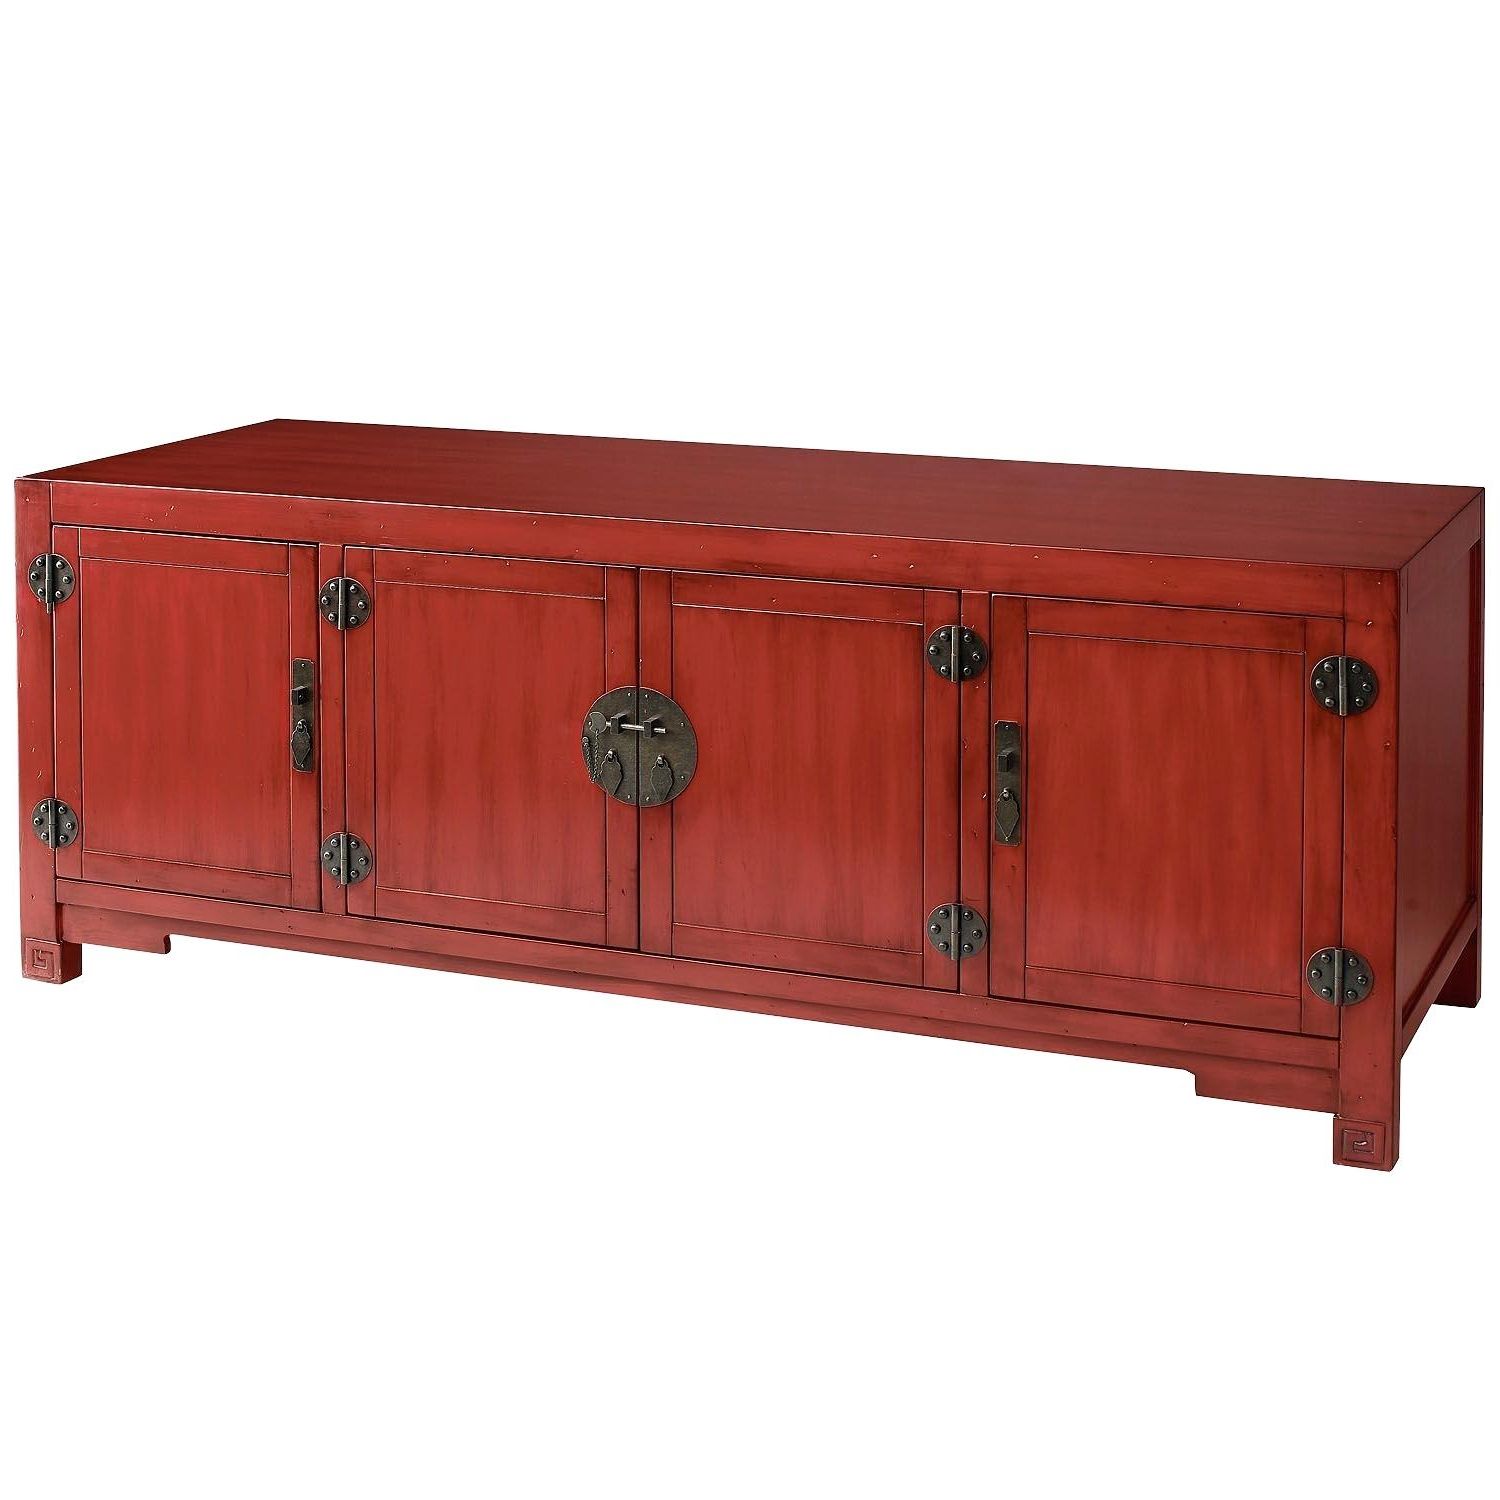 Most Popular Red Tv Stand Intended For Rustic Red Tv Stands (View 7 of 20)